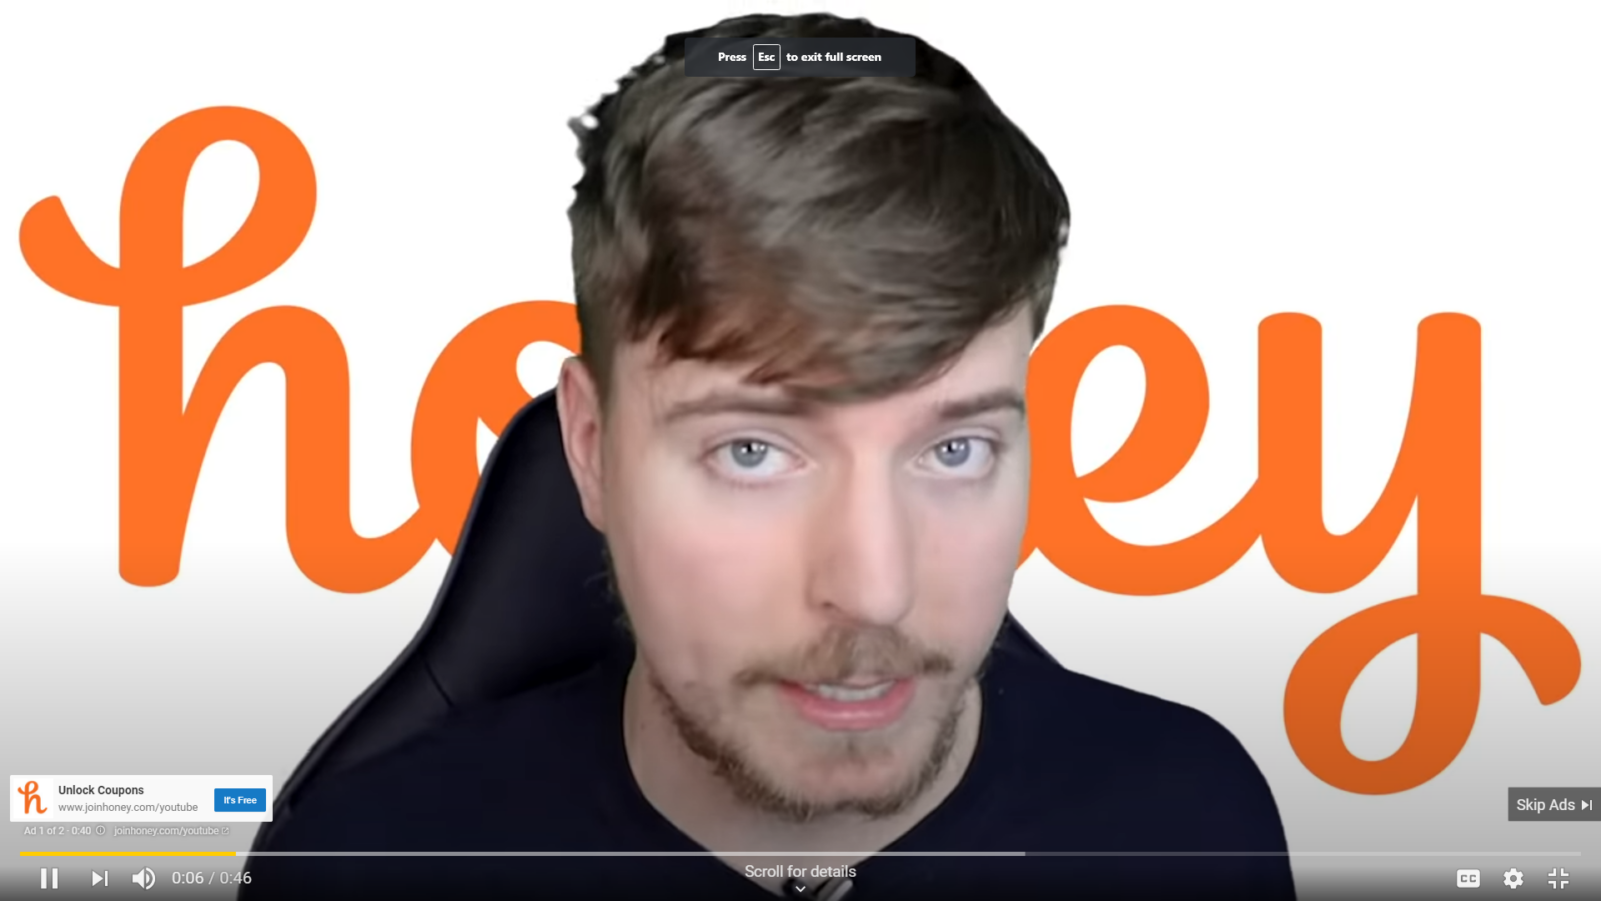 Mr.beast staring in a paid Google PPC advertisement for brand Honey